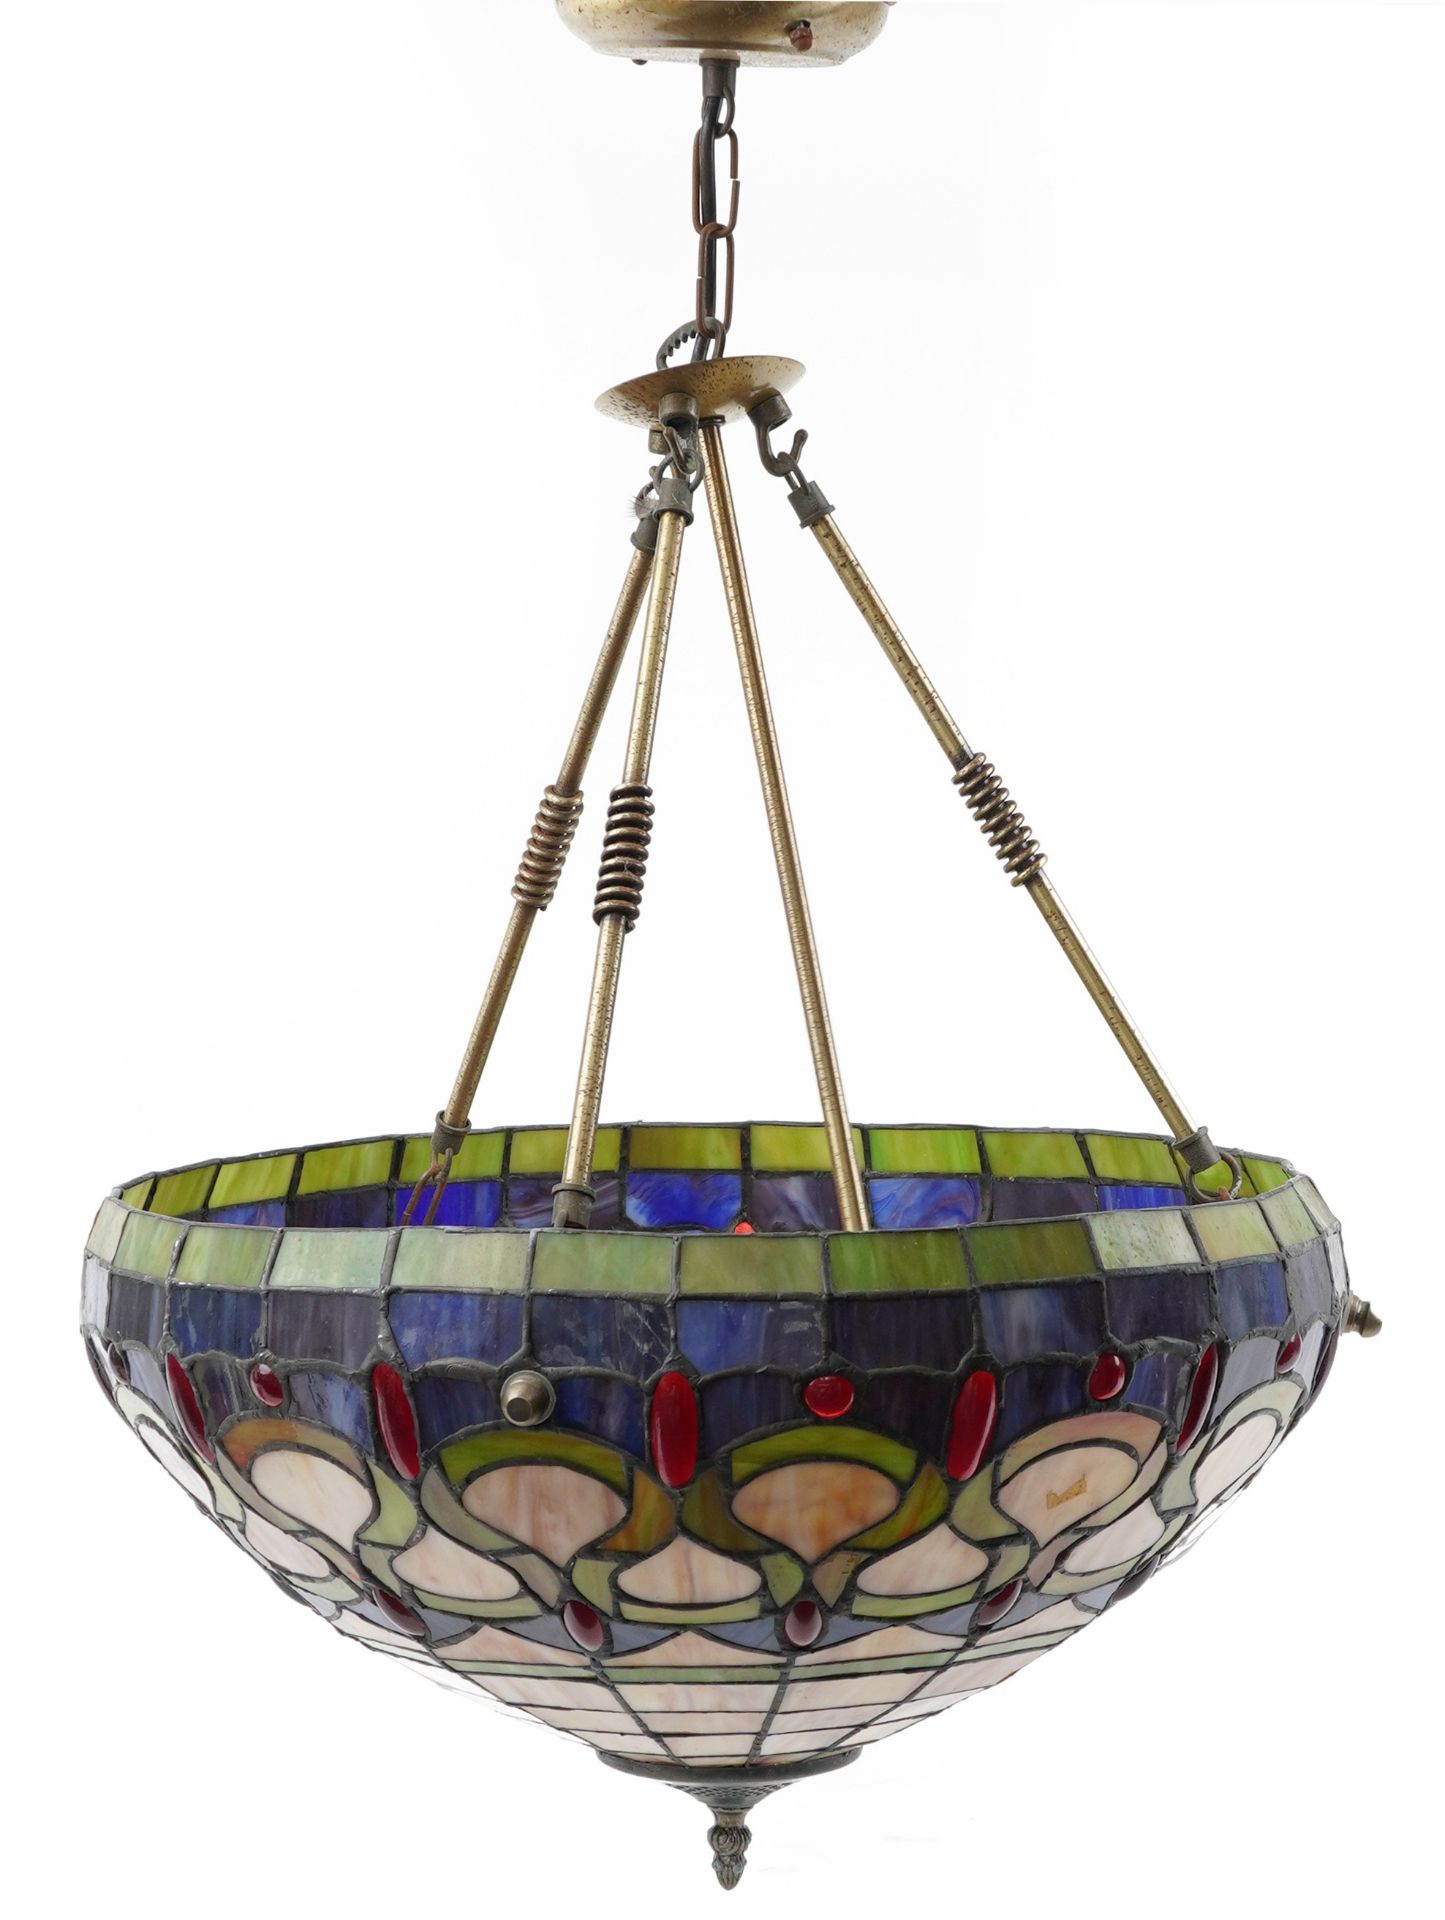 Pair of large Tiffany design leaded stained glass hanging light fittings, each 46cm in diameter : - Image 3 of 5